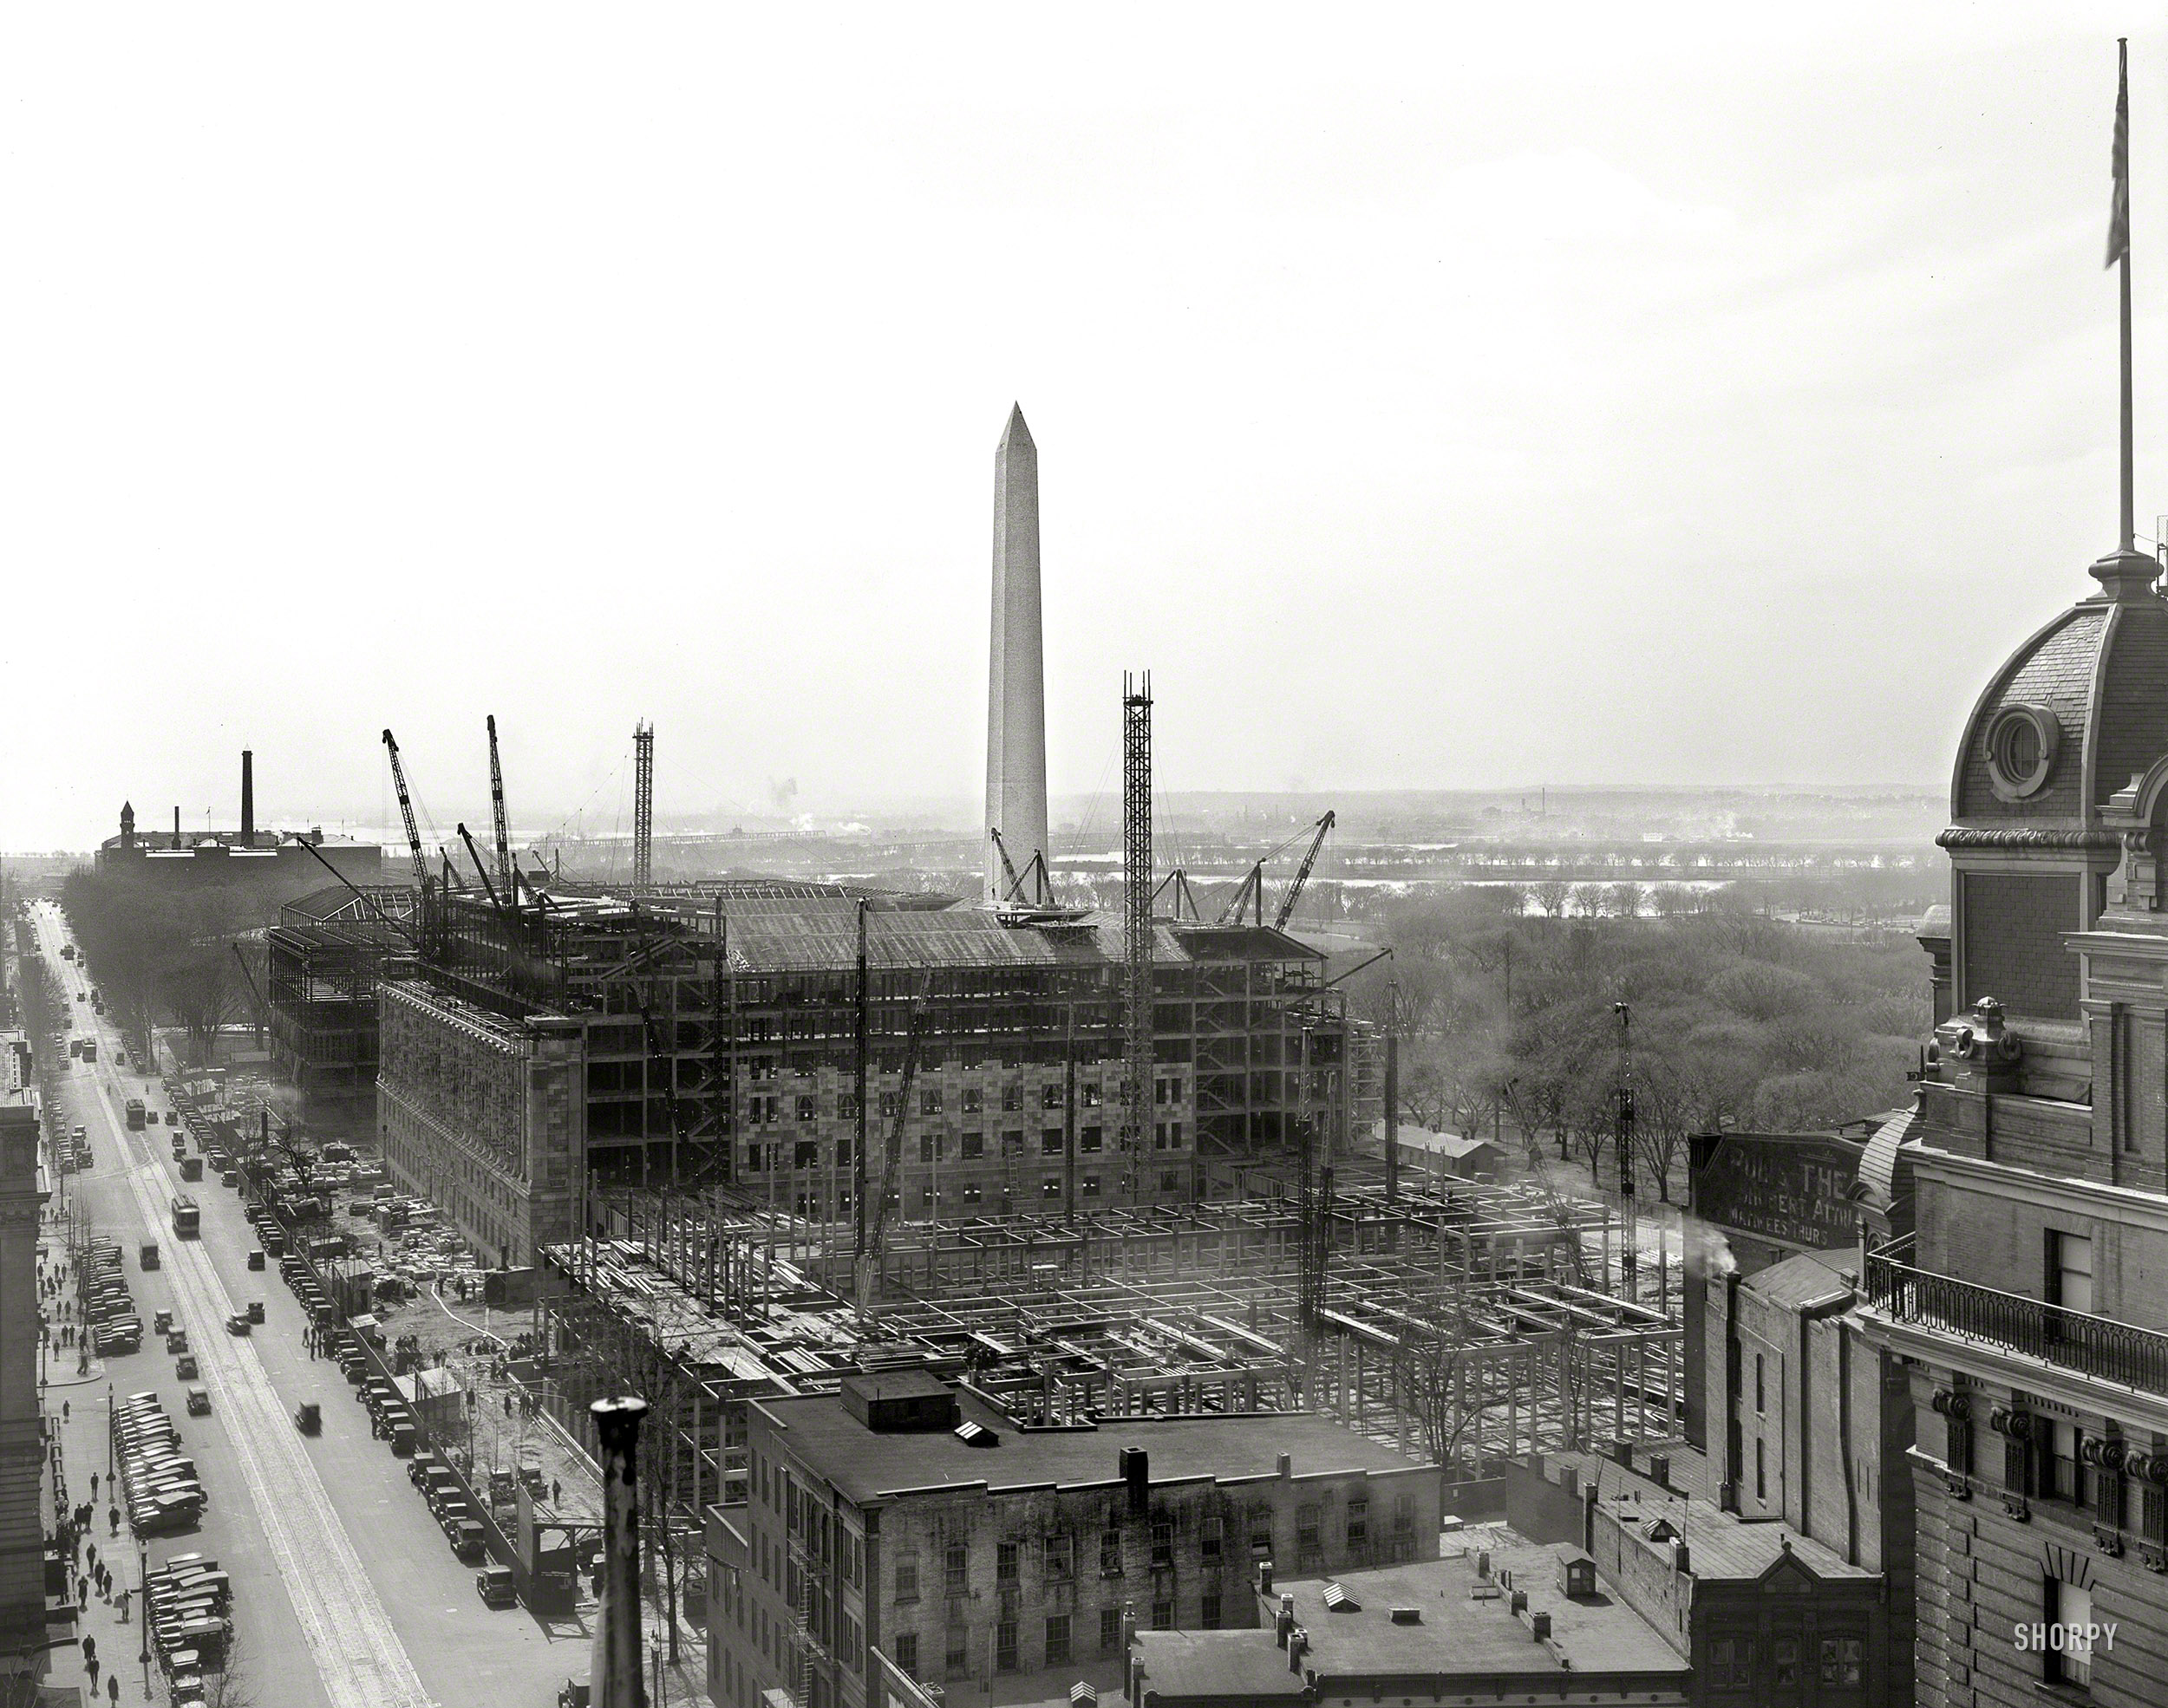 Washington, D.C., circa 1931. "Department of Commerce under construction from top of National Press Building looking down 14th Street." Willard Hotel at right. Large format negative by Theodor Horydczak. View full size.